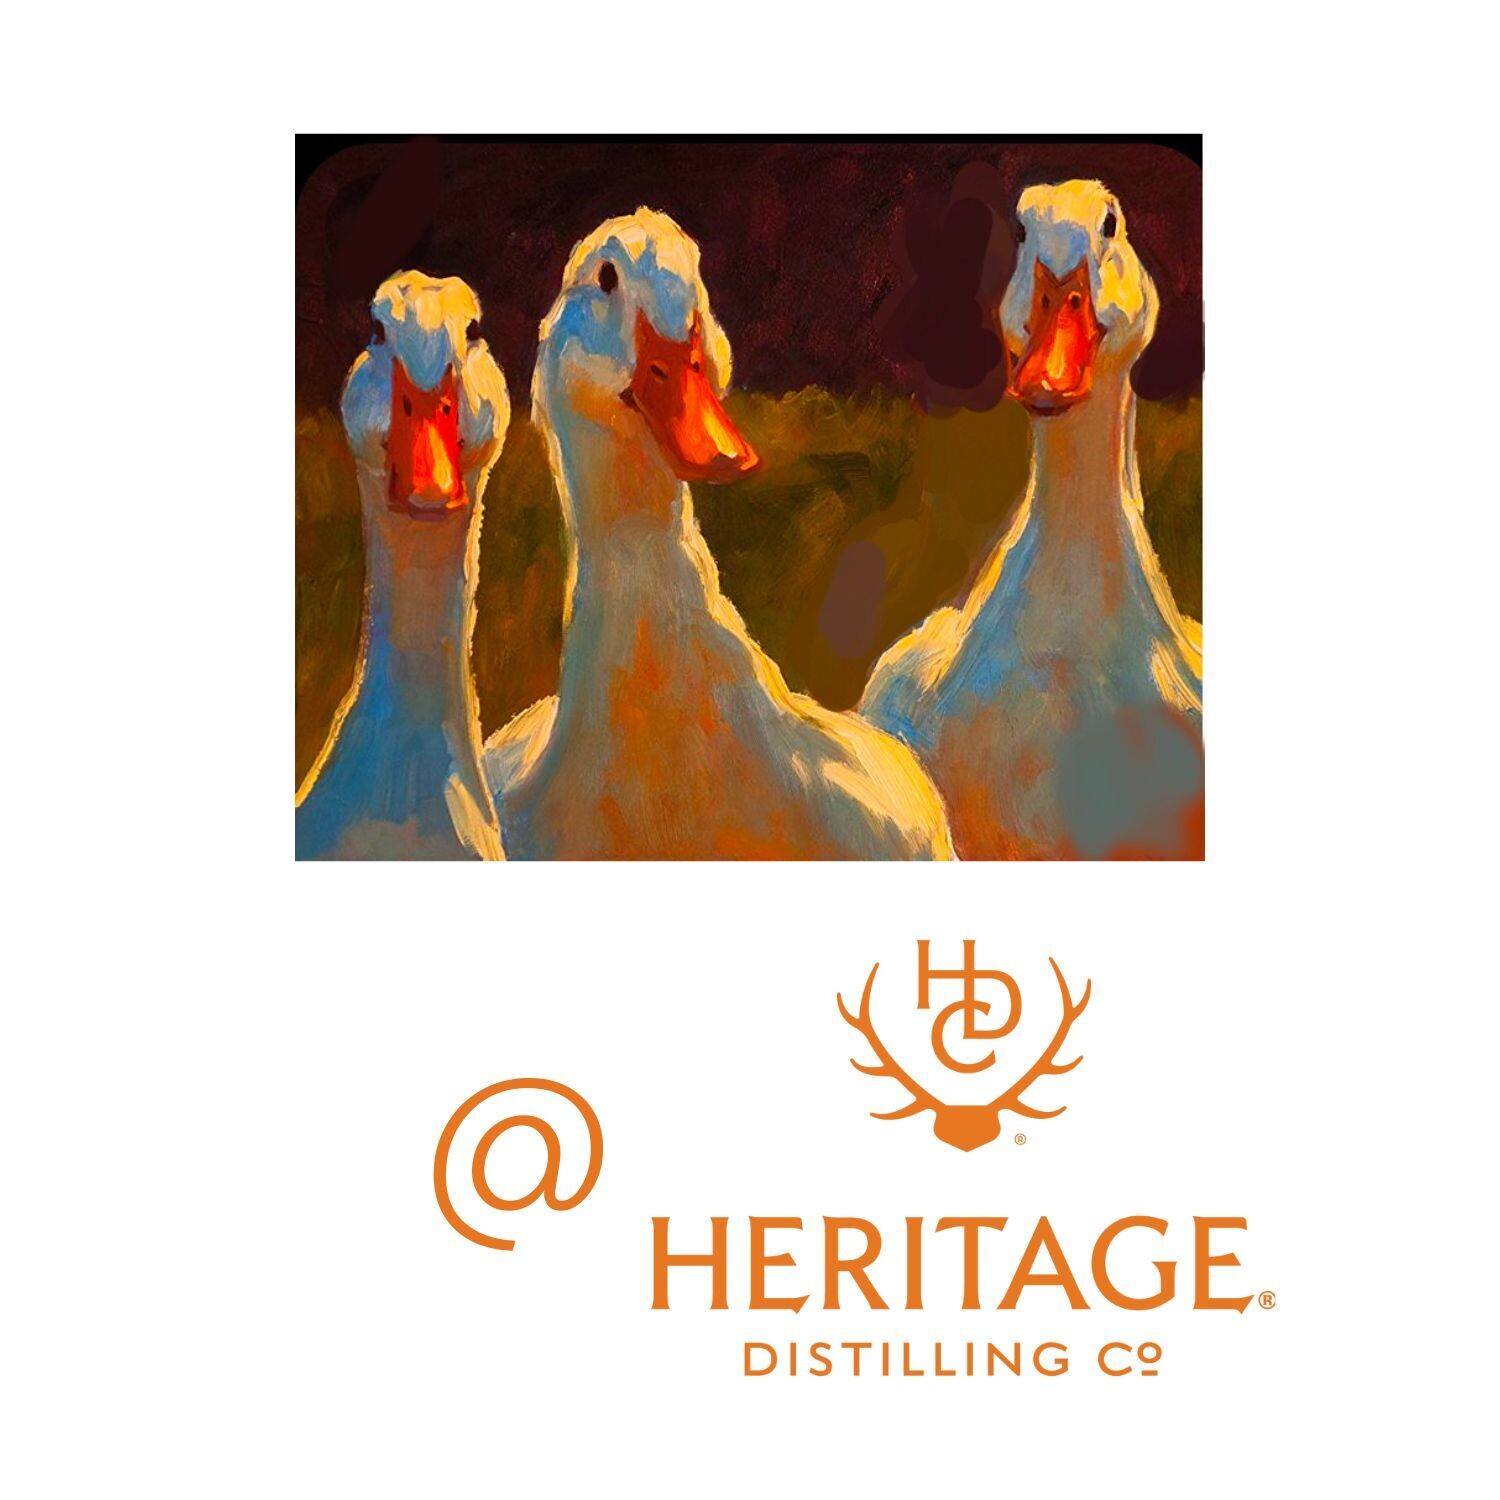 Paint-and-Taste - Heritage Distilling Co. Wed August 24 @ 5:00-7:30PM